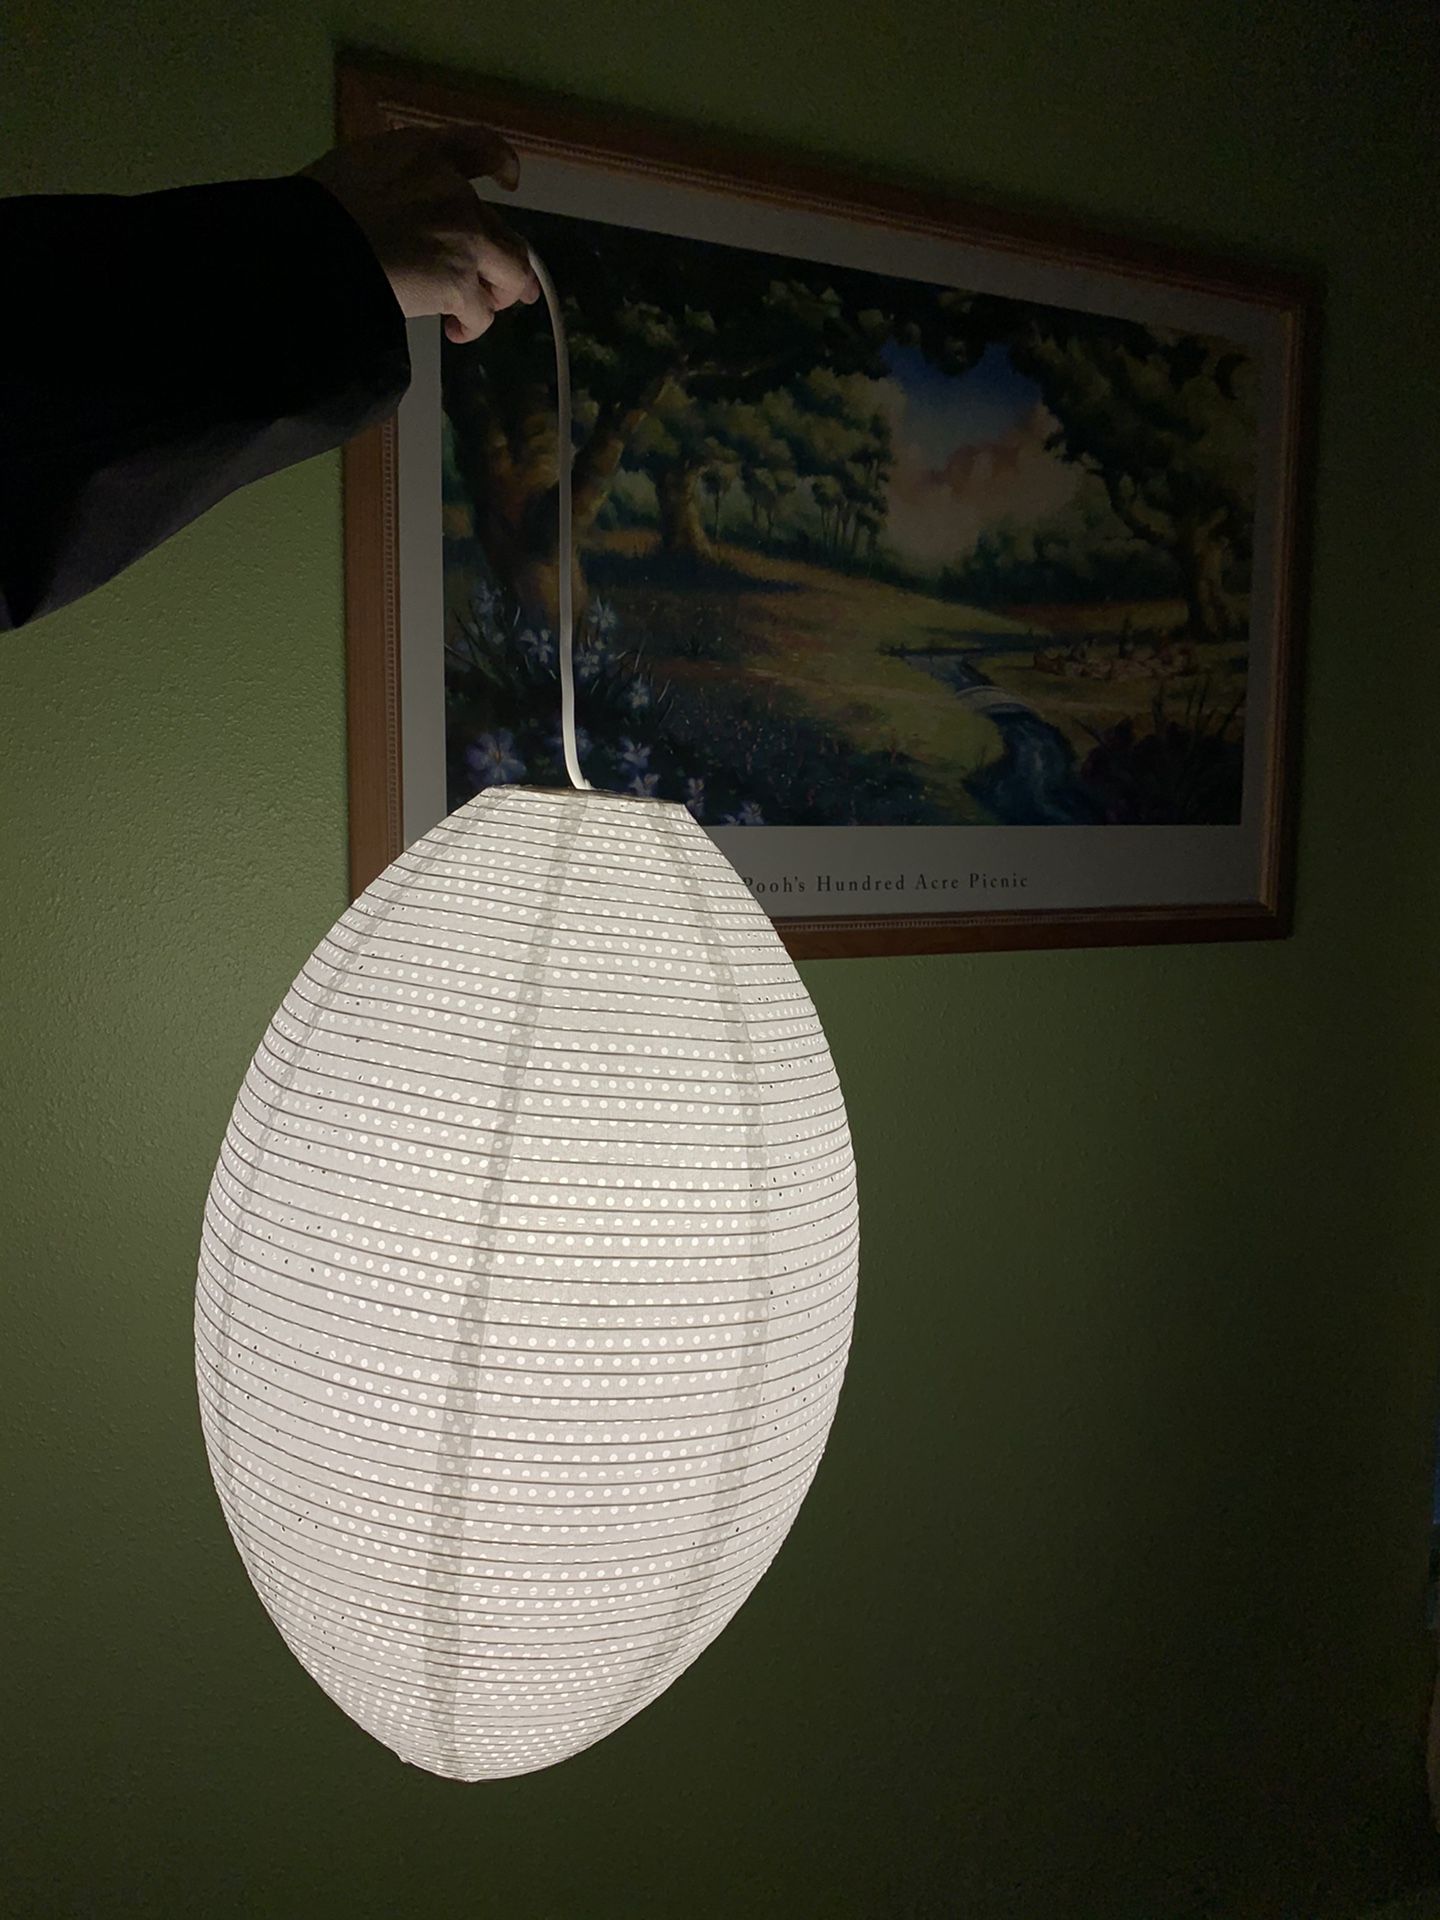 IKEA Pendant Lamp Shade & Cord with Lightbulb Included